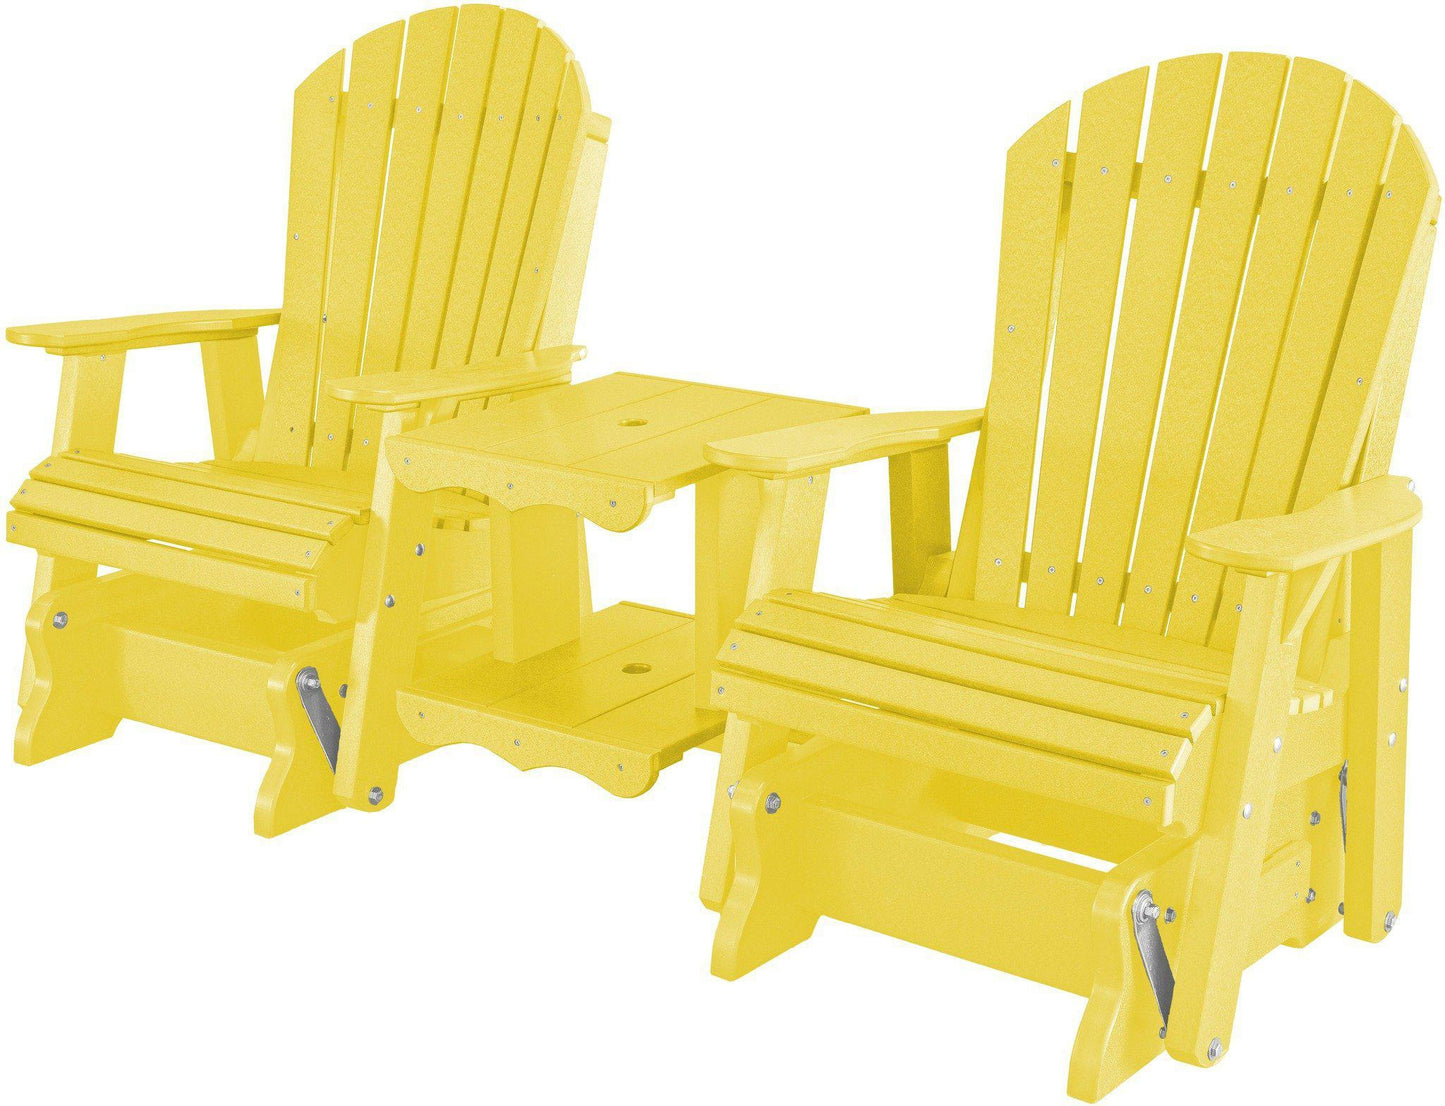 Wildridge Recycled Plastic Heritage Rock-A-Tee Double Seat Adirondack Glider - LEAD TIME TO SHIP 3 WEEKS